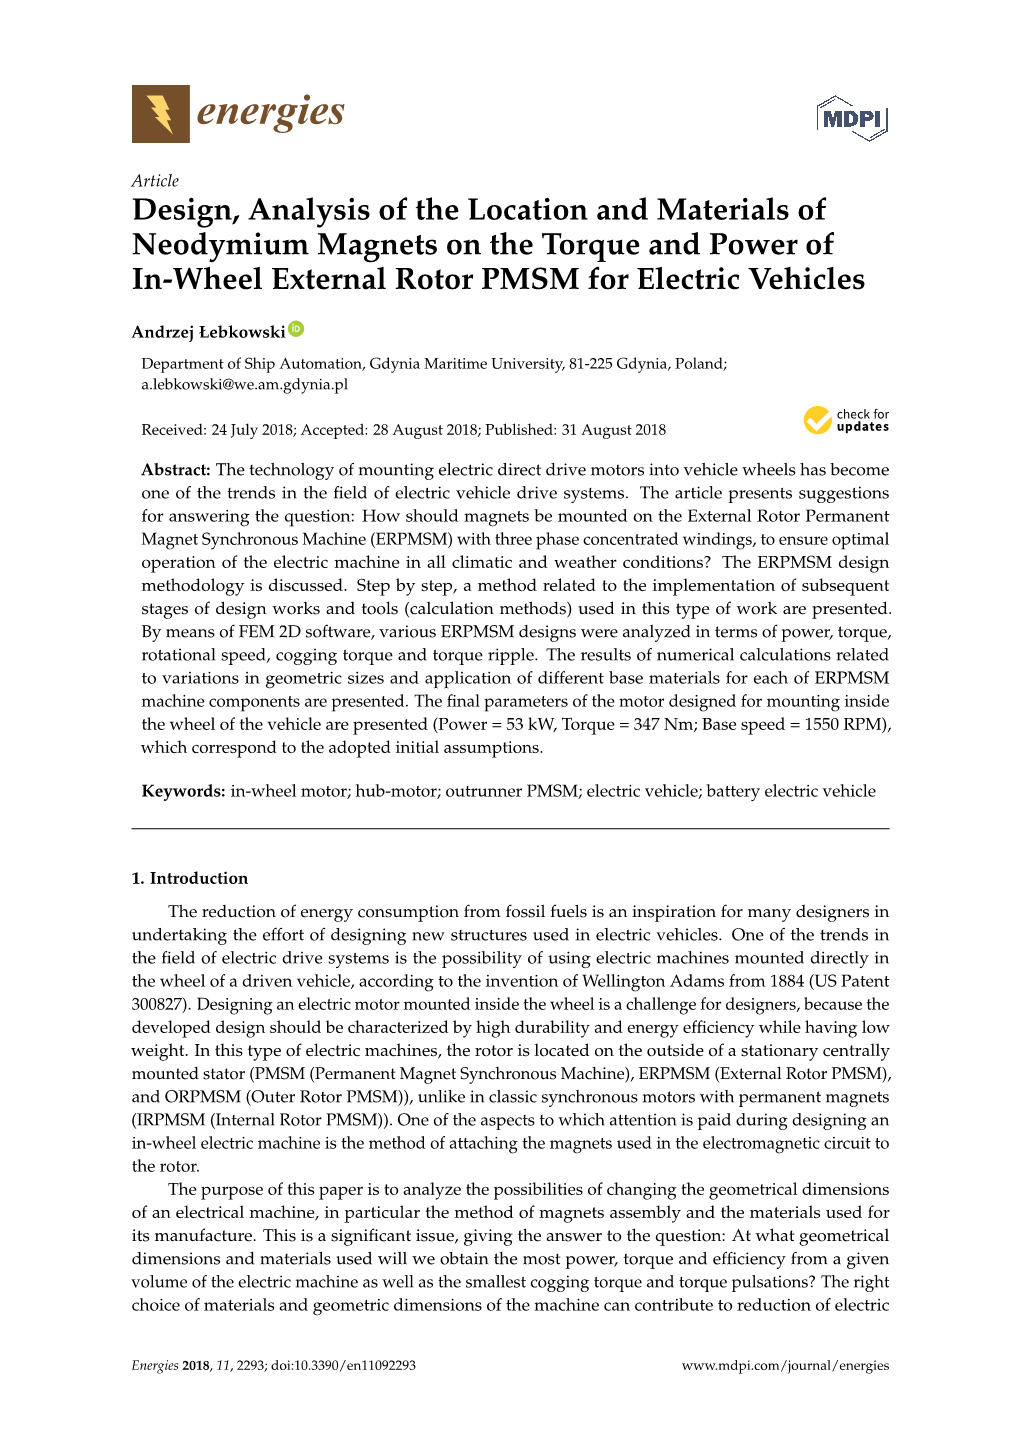 Design, Analysis of the Location and Materials of Neodymium Magnets on the Torque and Power of In-Wheel External Rotor PMSM for Electric Vehicles